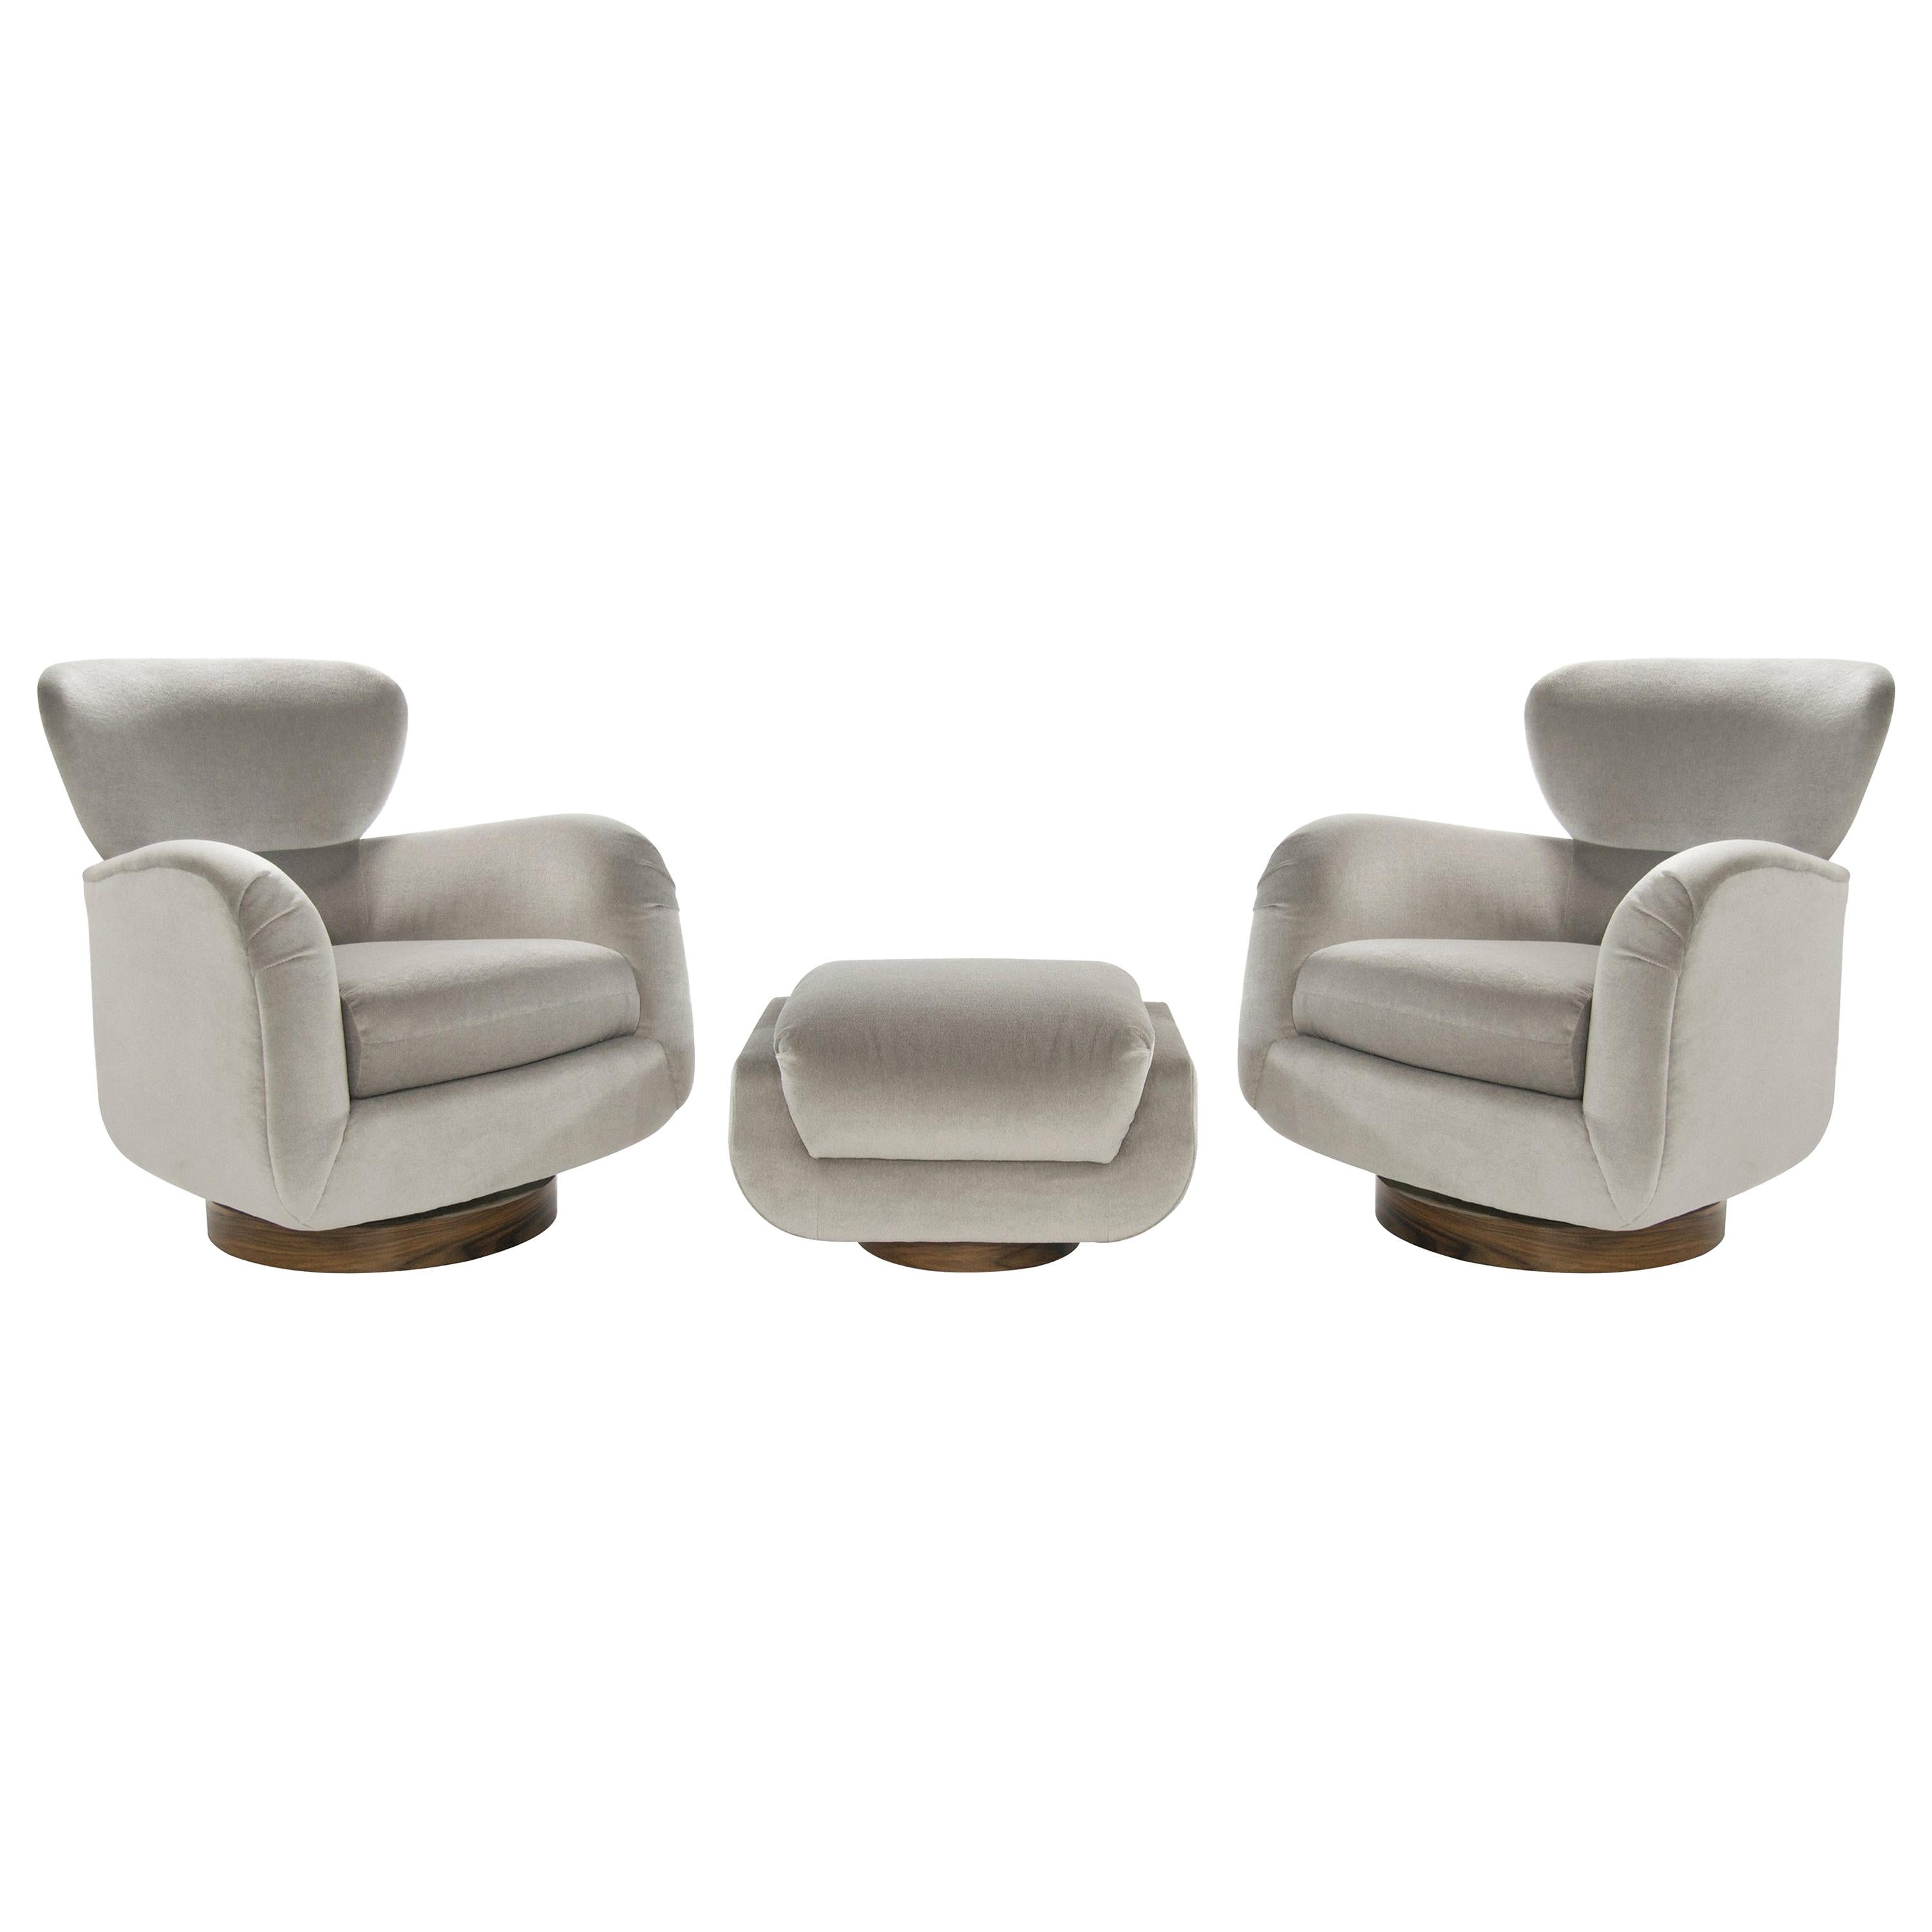 Exceptional Set of Wingback Swivel Chairs on Rosewood by Vladimir Kagan